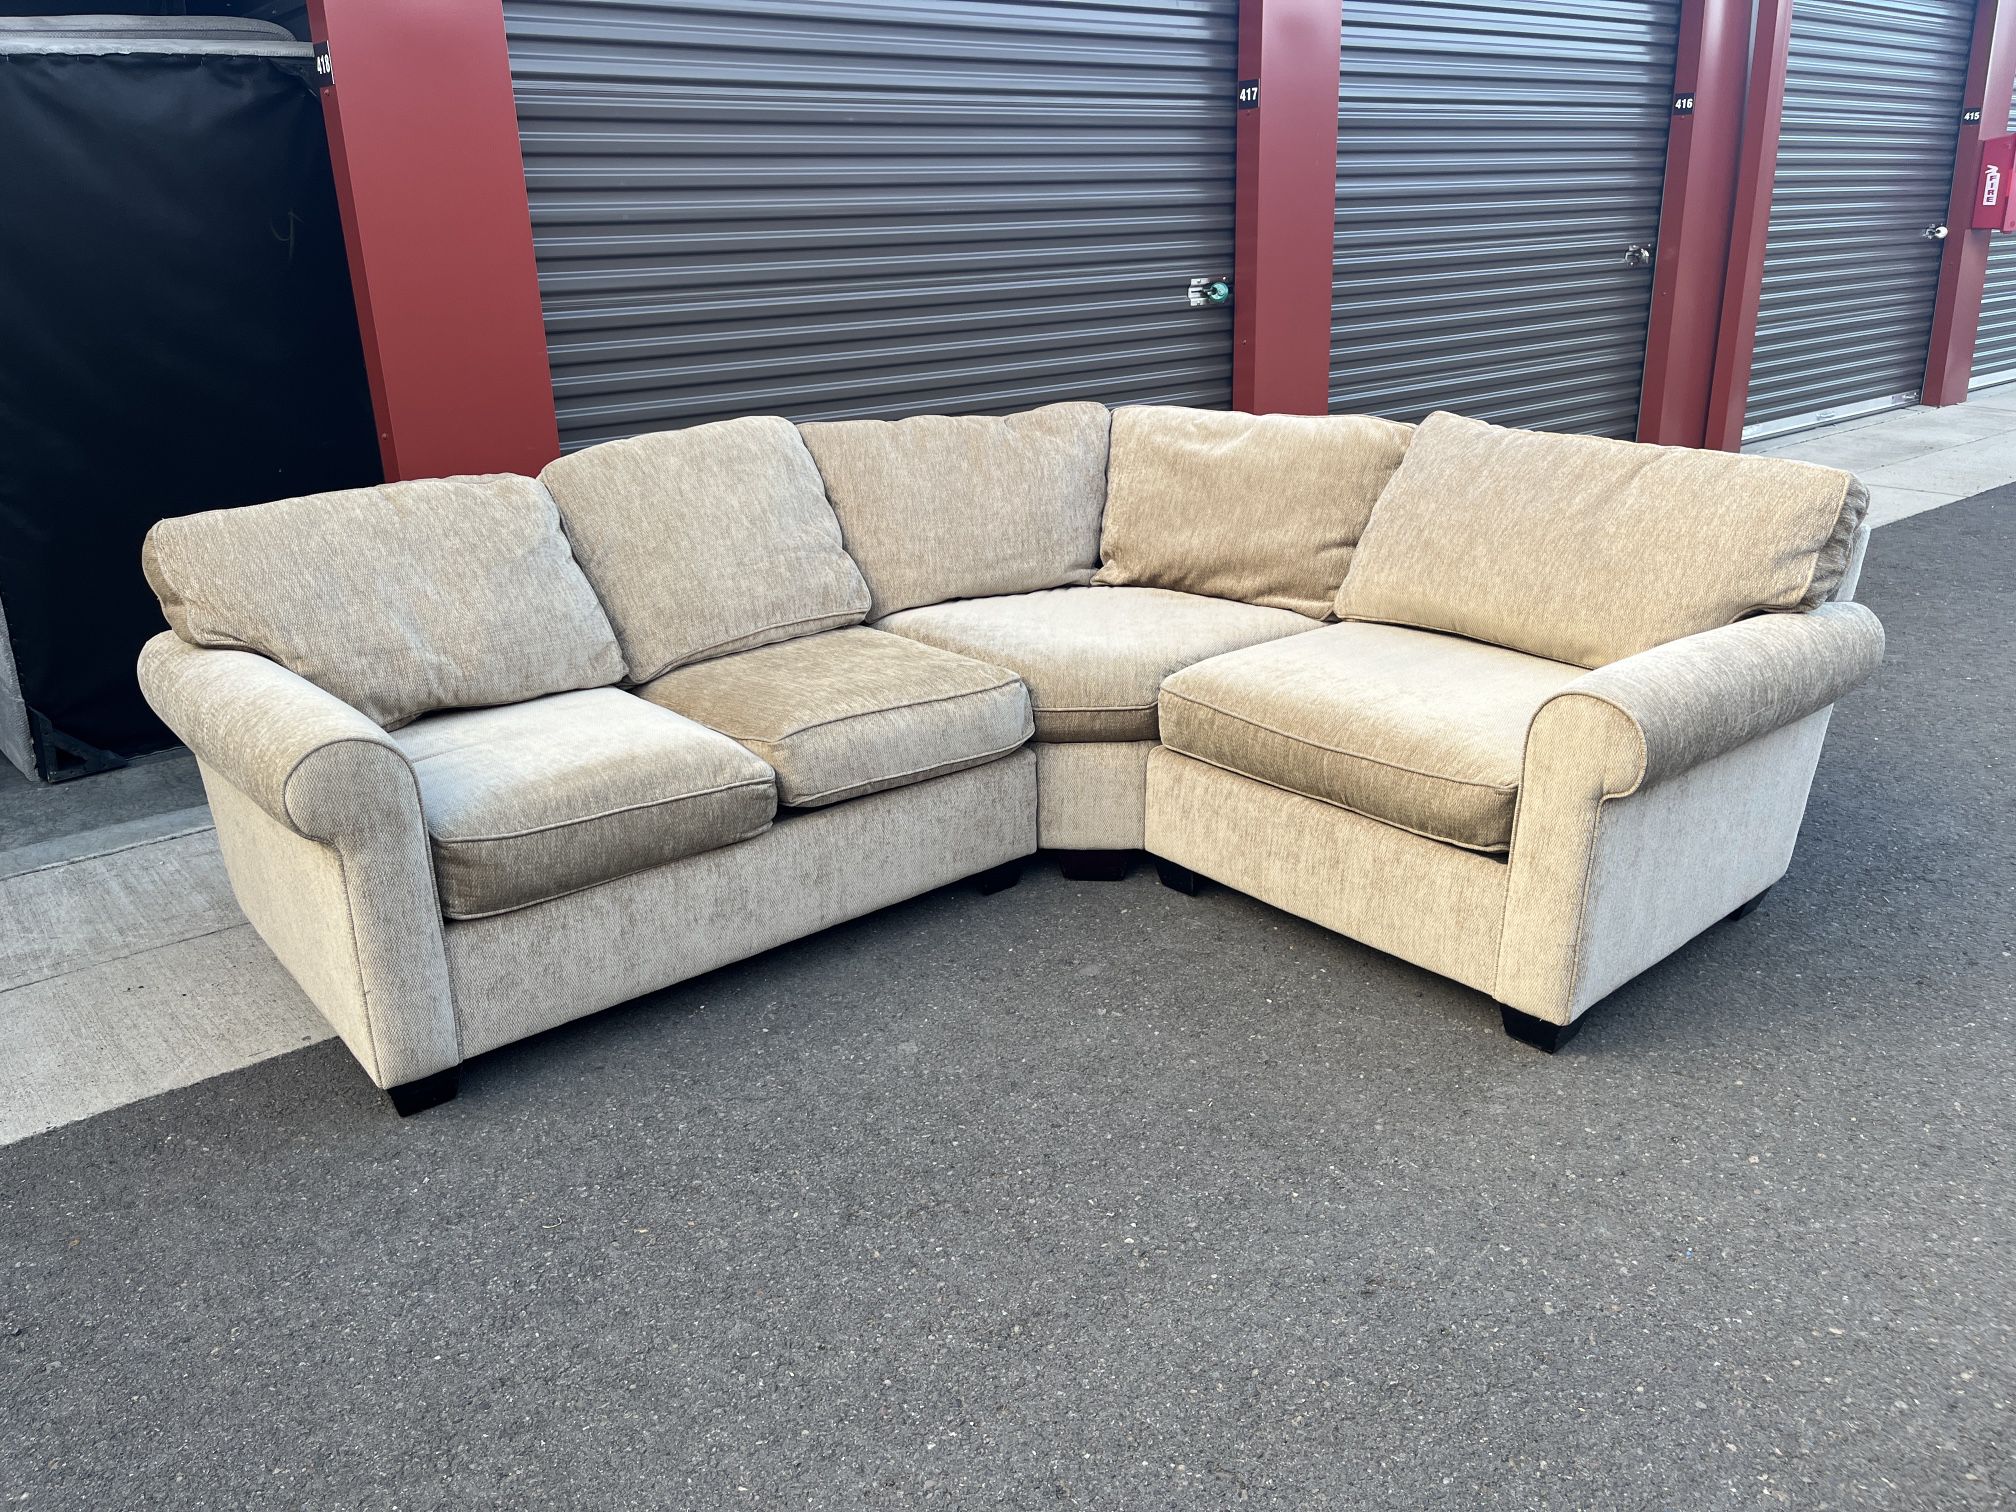 Small Sectional Couch - Pottery Barn 